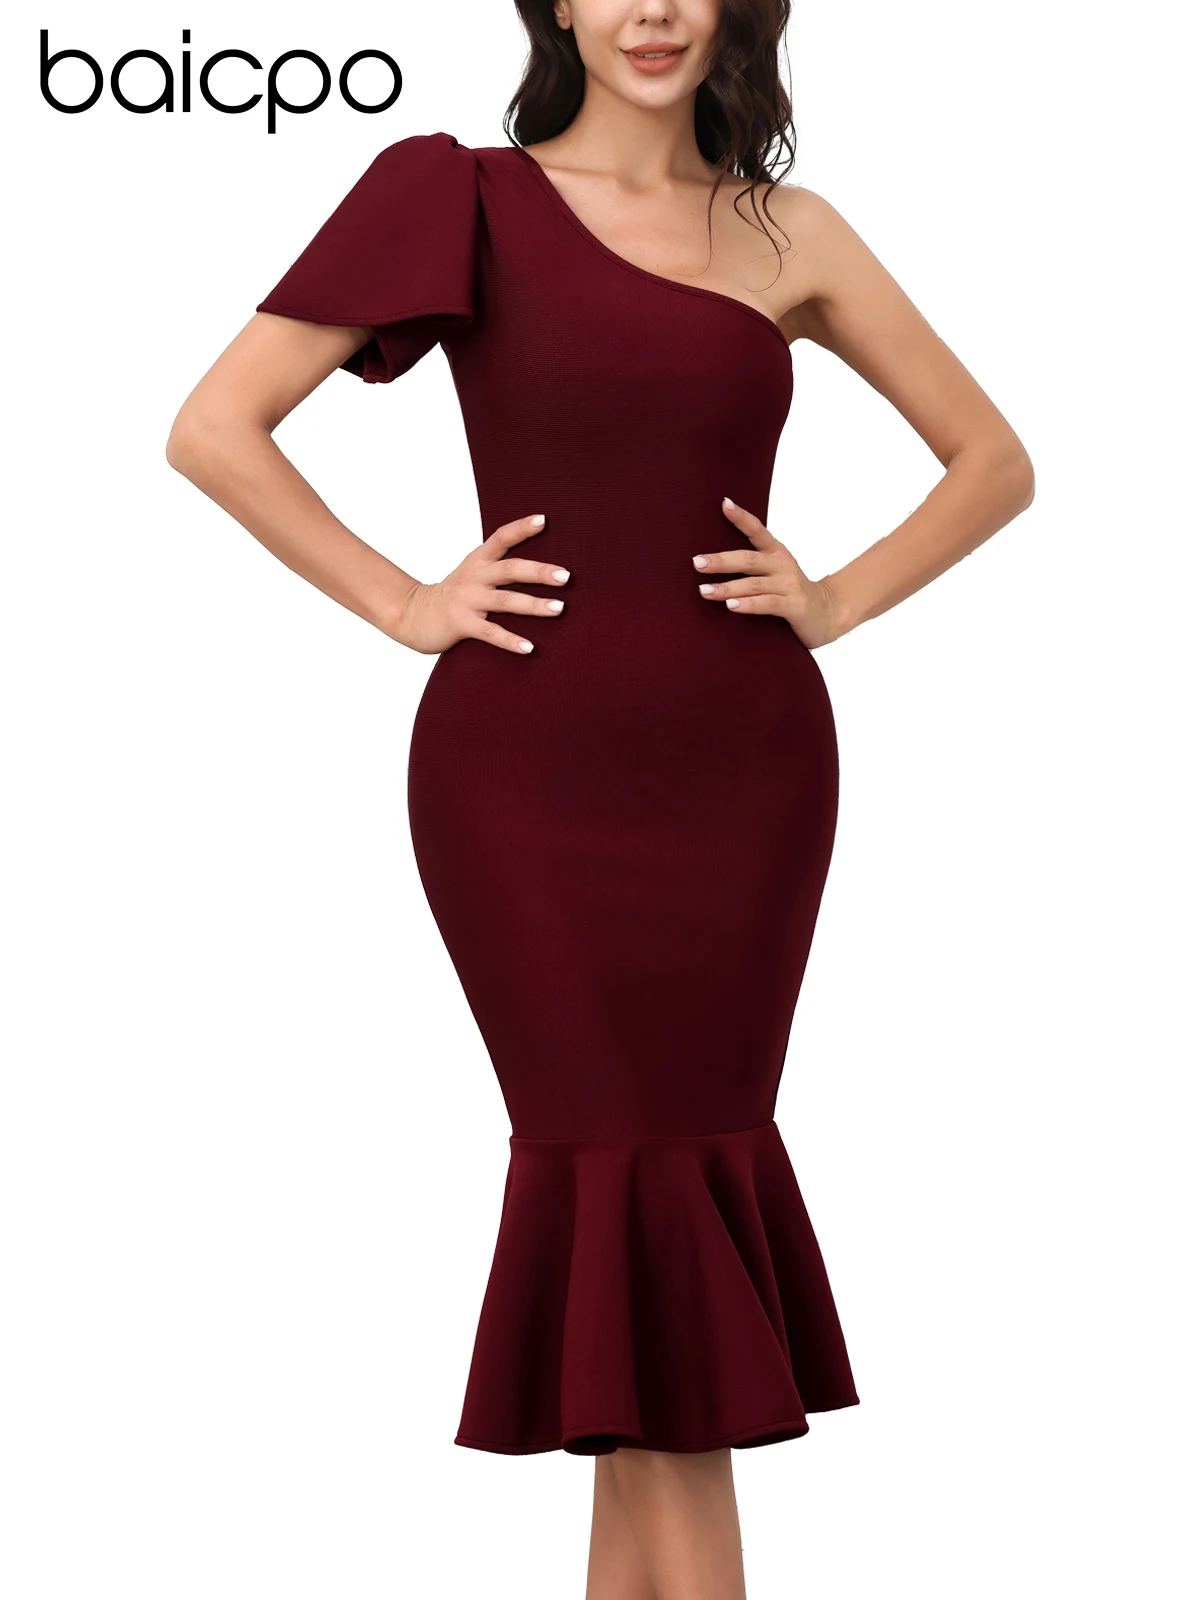 

Baicpo Womens One Shoulder Fishtail Bandage Dress for Women Female Formal Occasion Evening Party Cocktail Wedding Guest Dresses